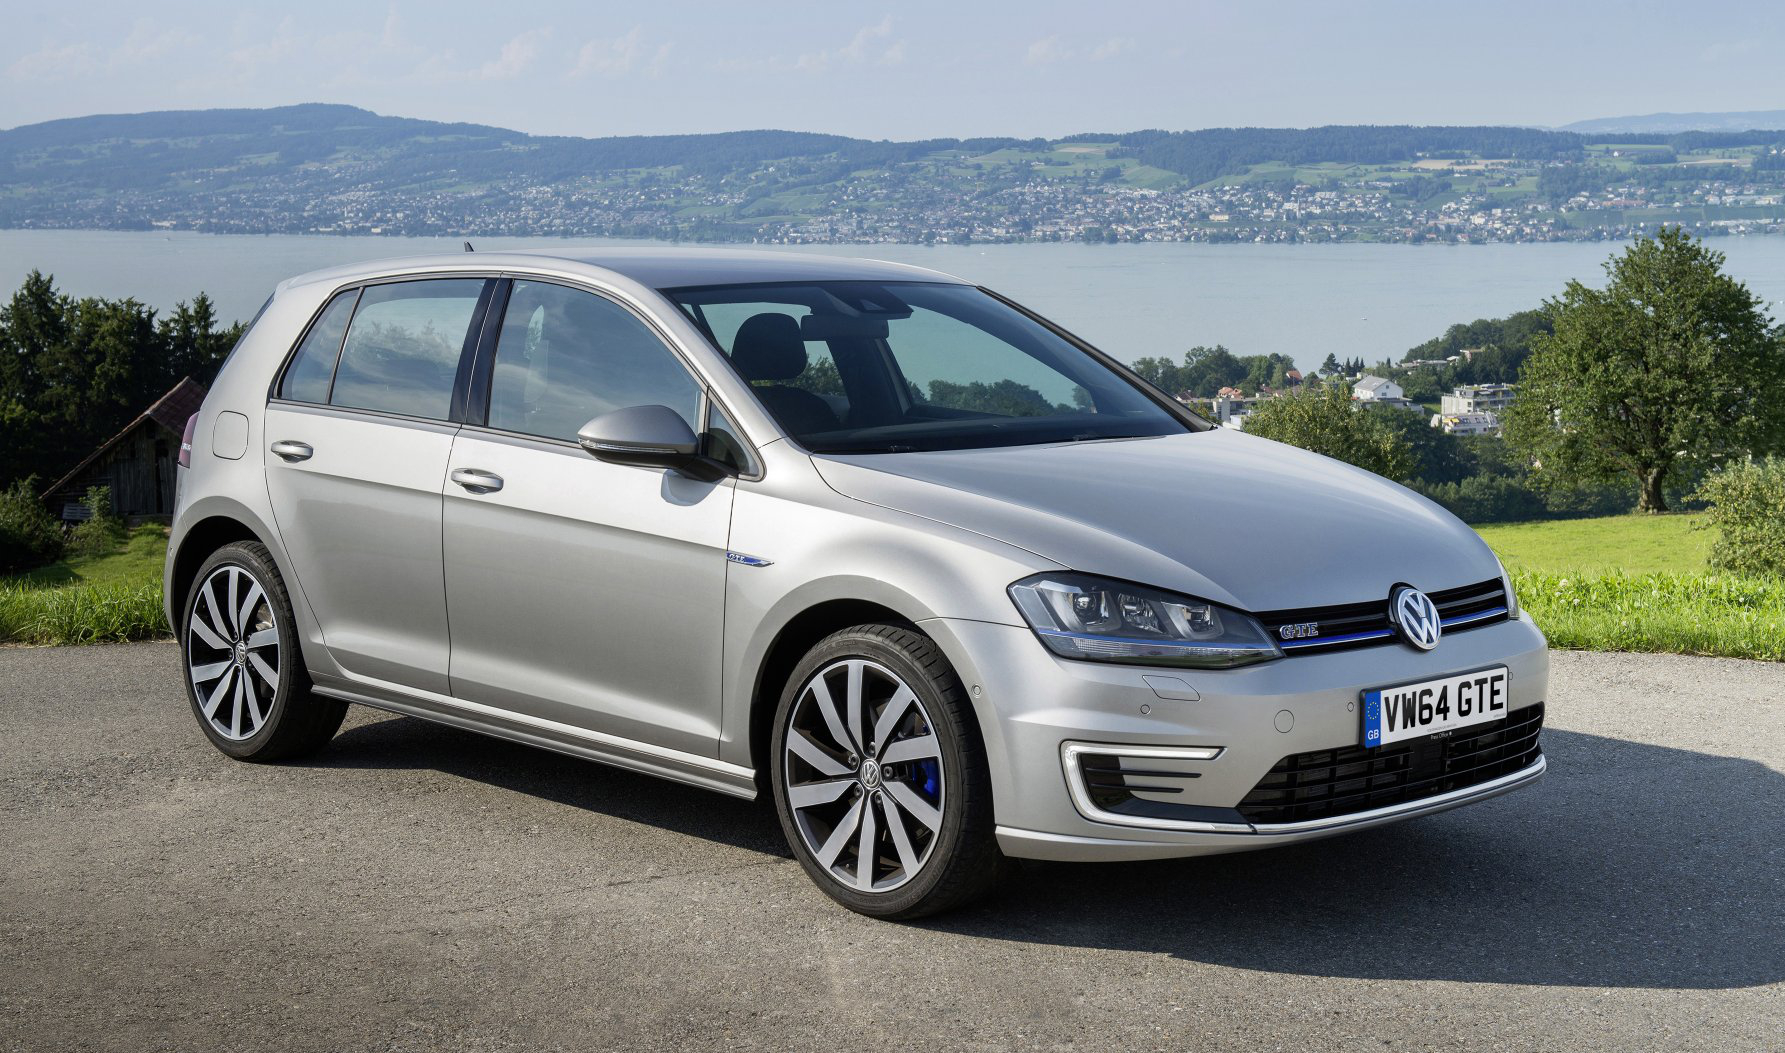 Volkswagen Golf GTE, Price and Release Date Announced